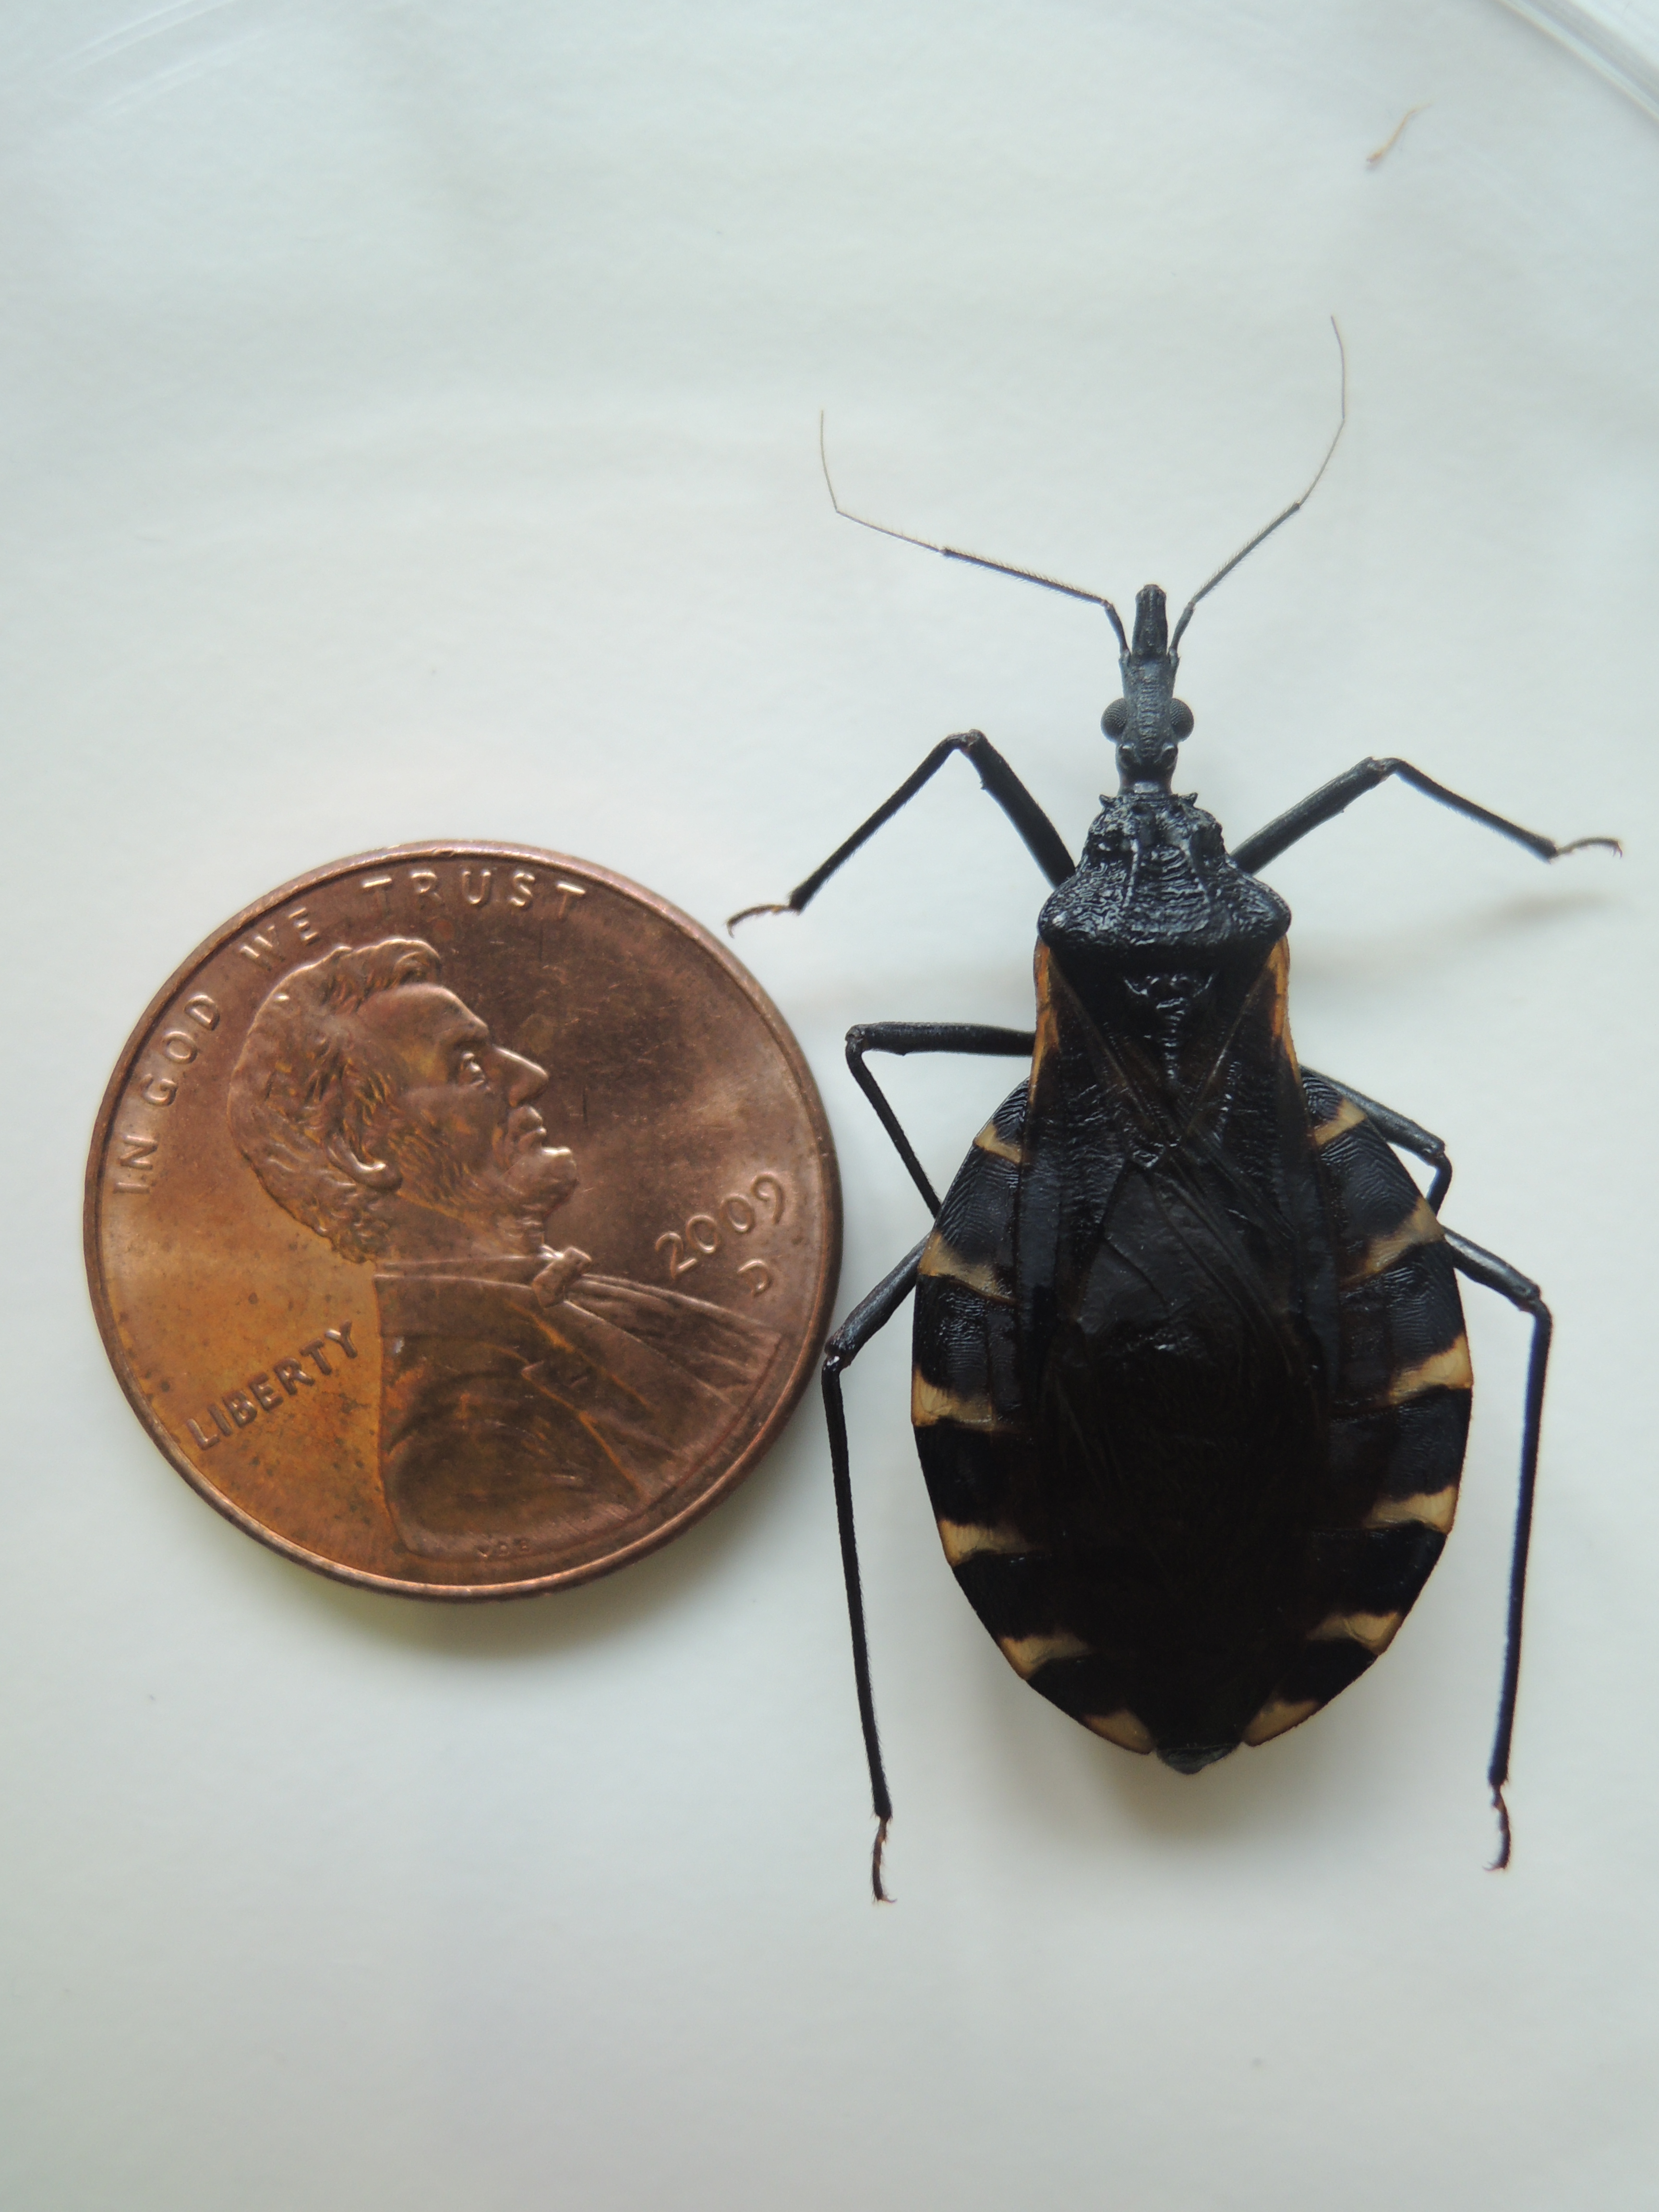 How can you identify common household bugs and insects?